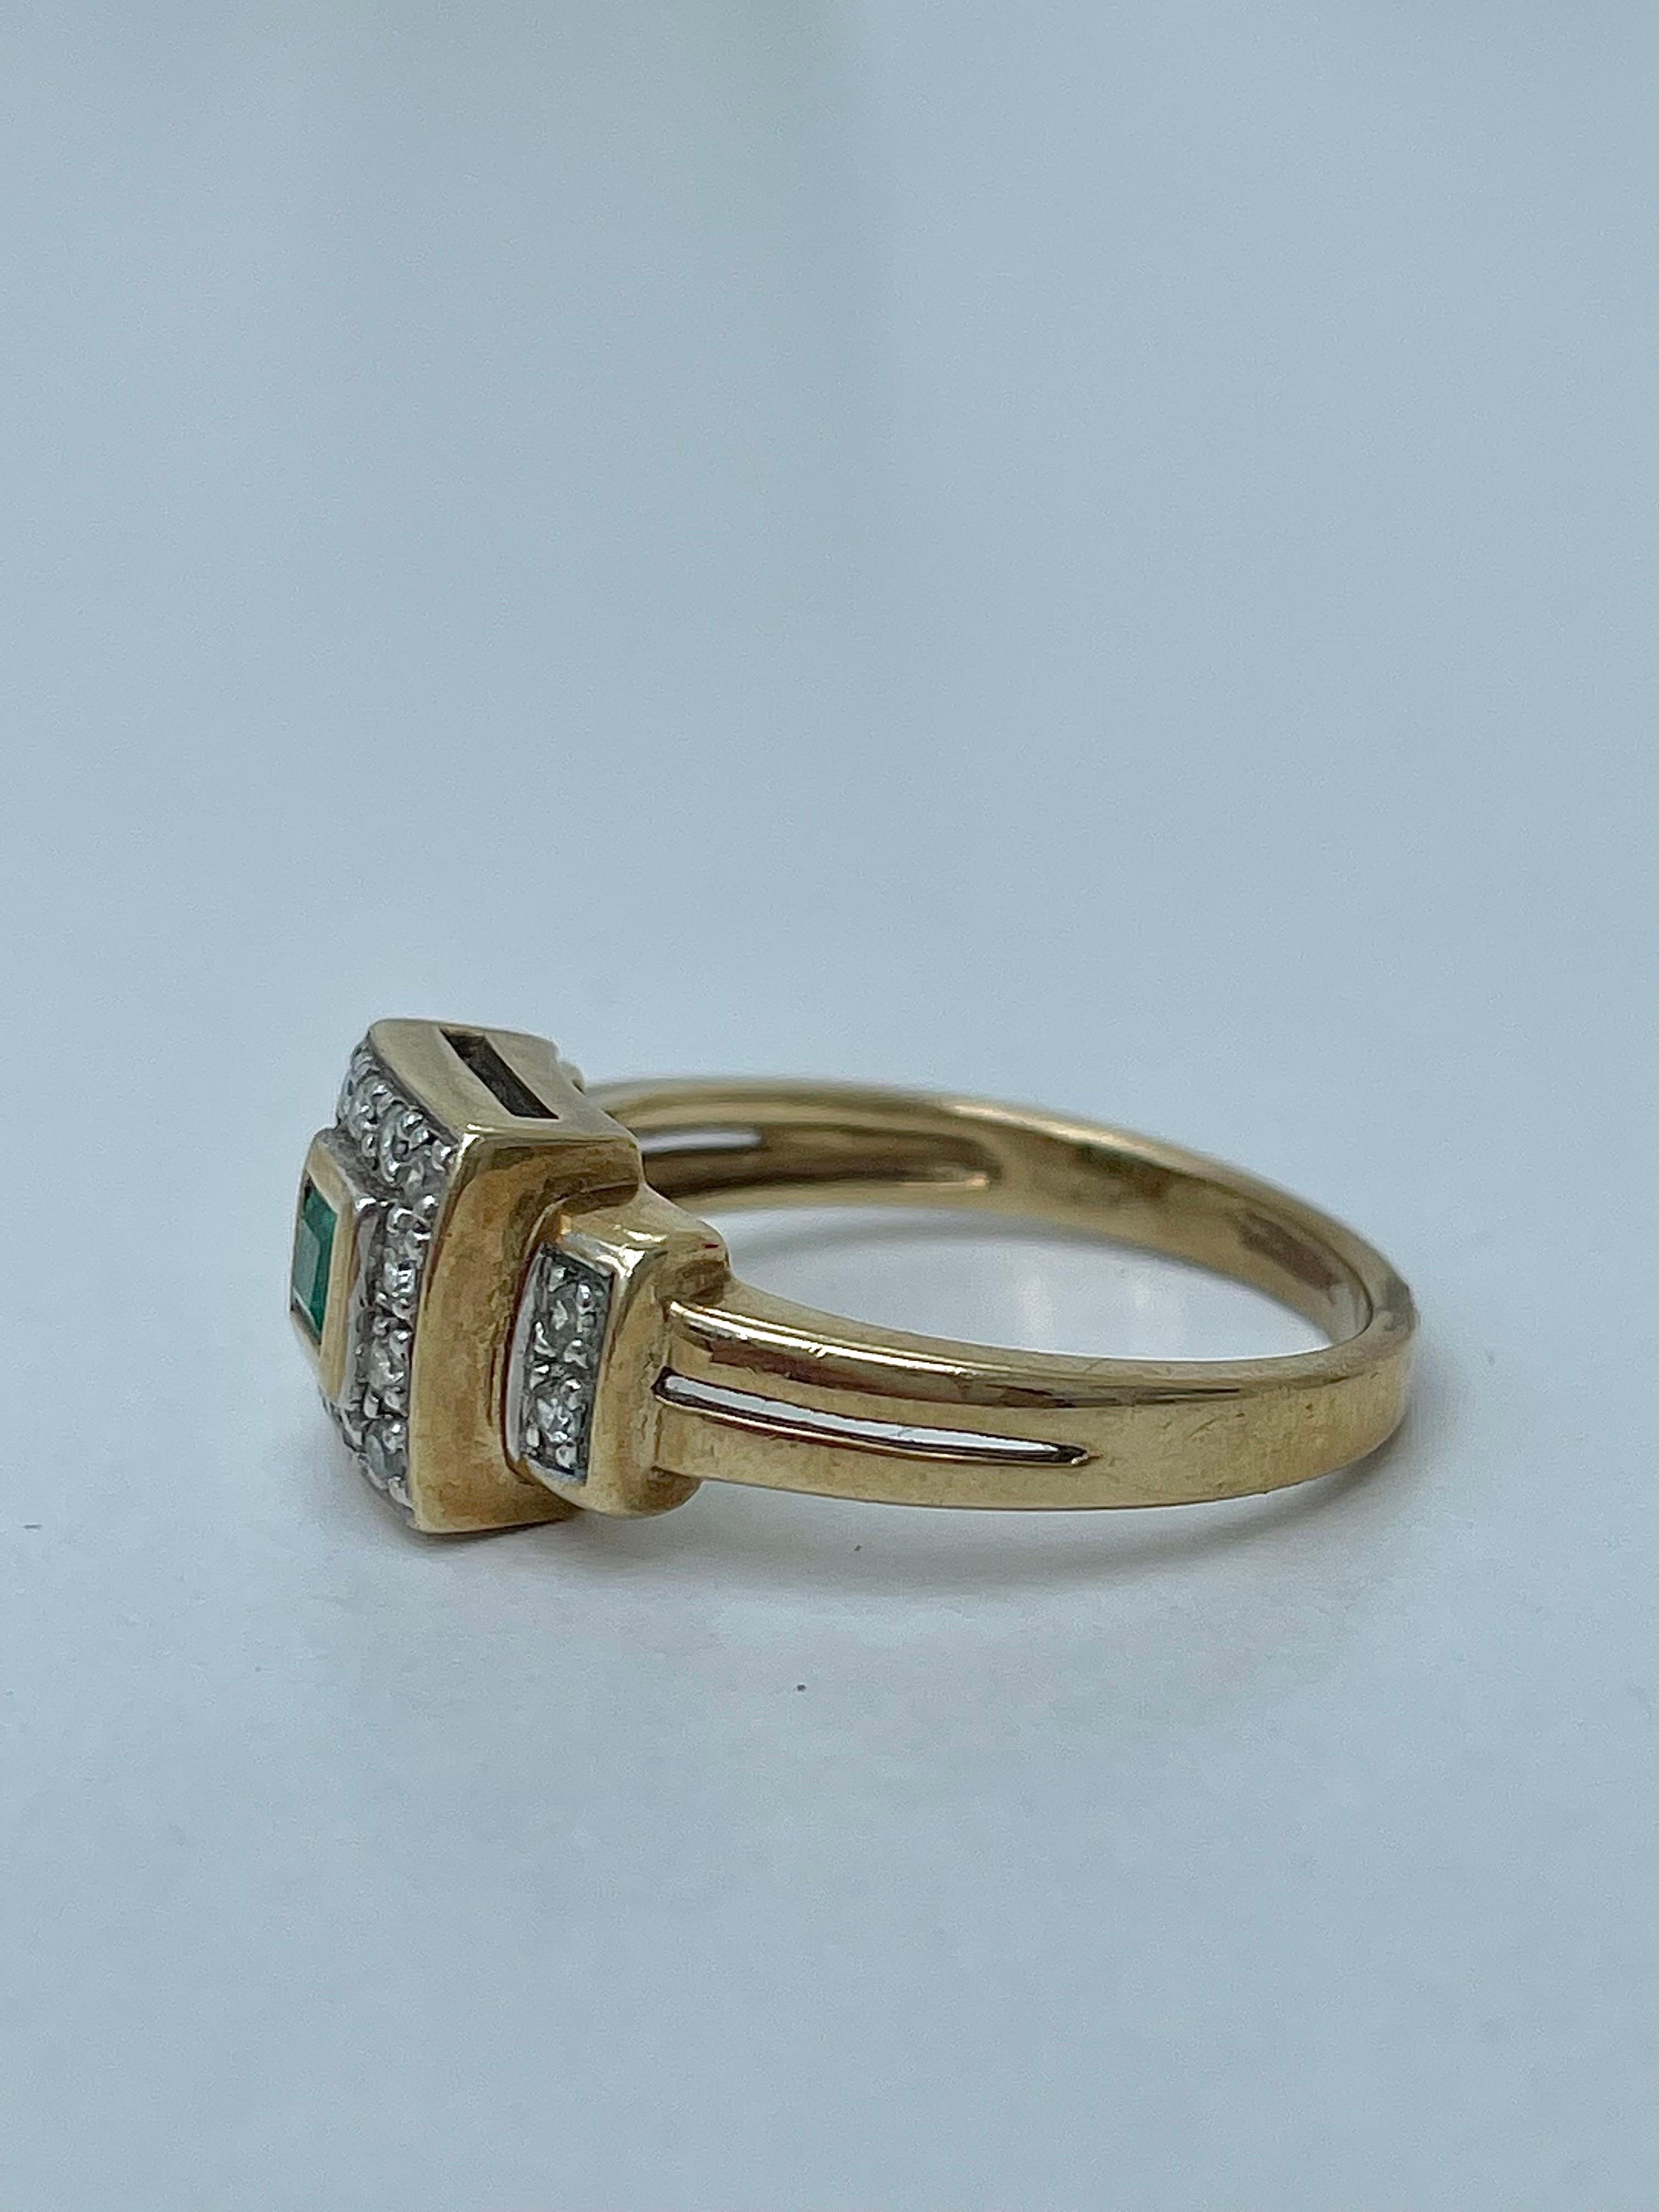 Vintage 9ct Yellow Gold Emerald and Diamond Square Ring 

the most exquisite diamond and emerald ring, the detail is outstanding 

The item comes without the box in the photos but will be presented in a gift box

Measurements: weight 3.48g, size UK